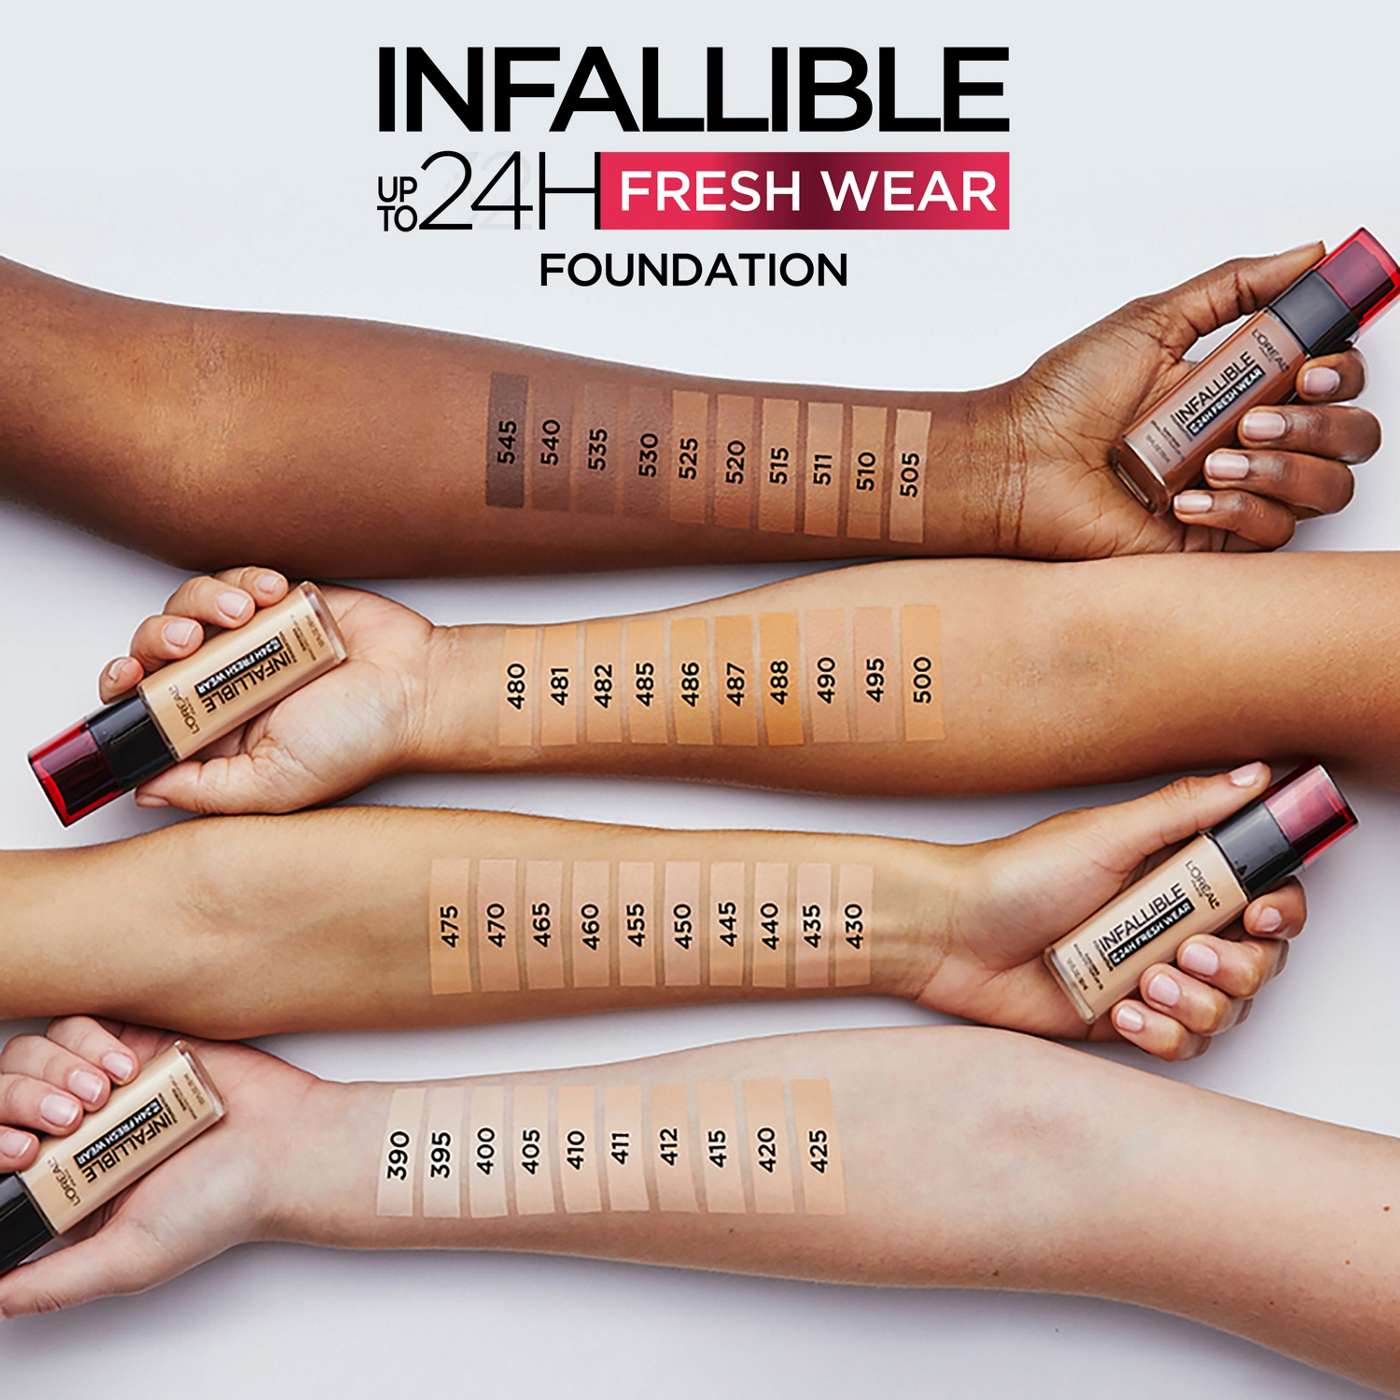 L'Oréal Paris Infallible Up to 24 Hour Fresh Wear Foundation - Lightweight Warm Almond; image 6 of 8